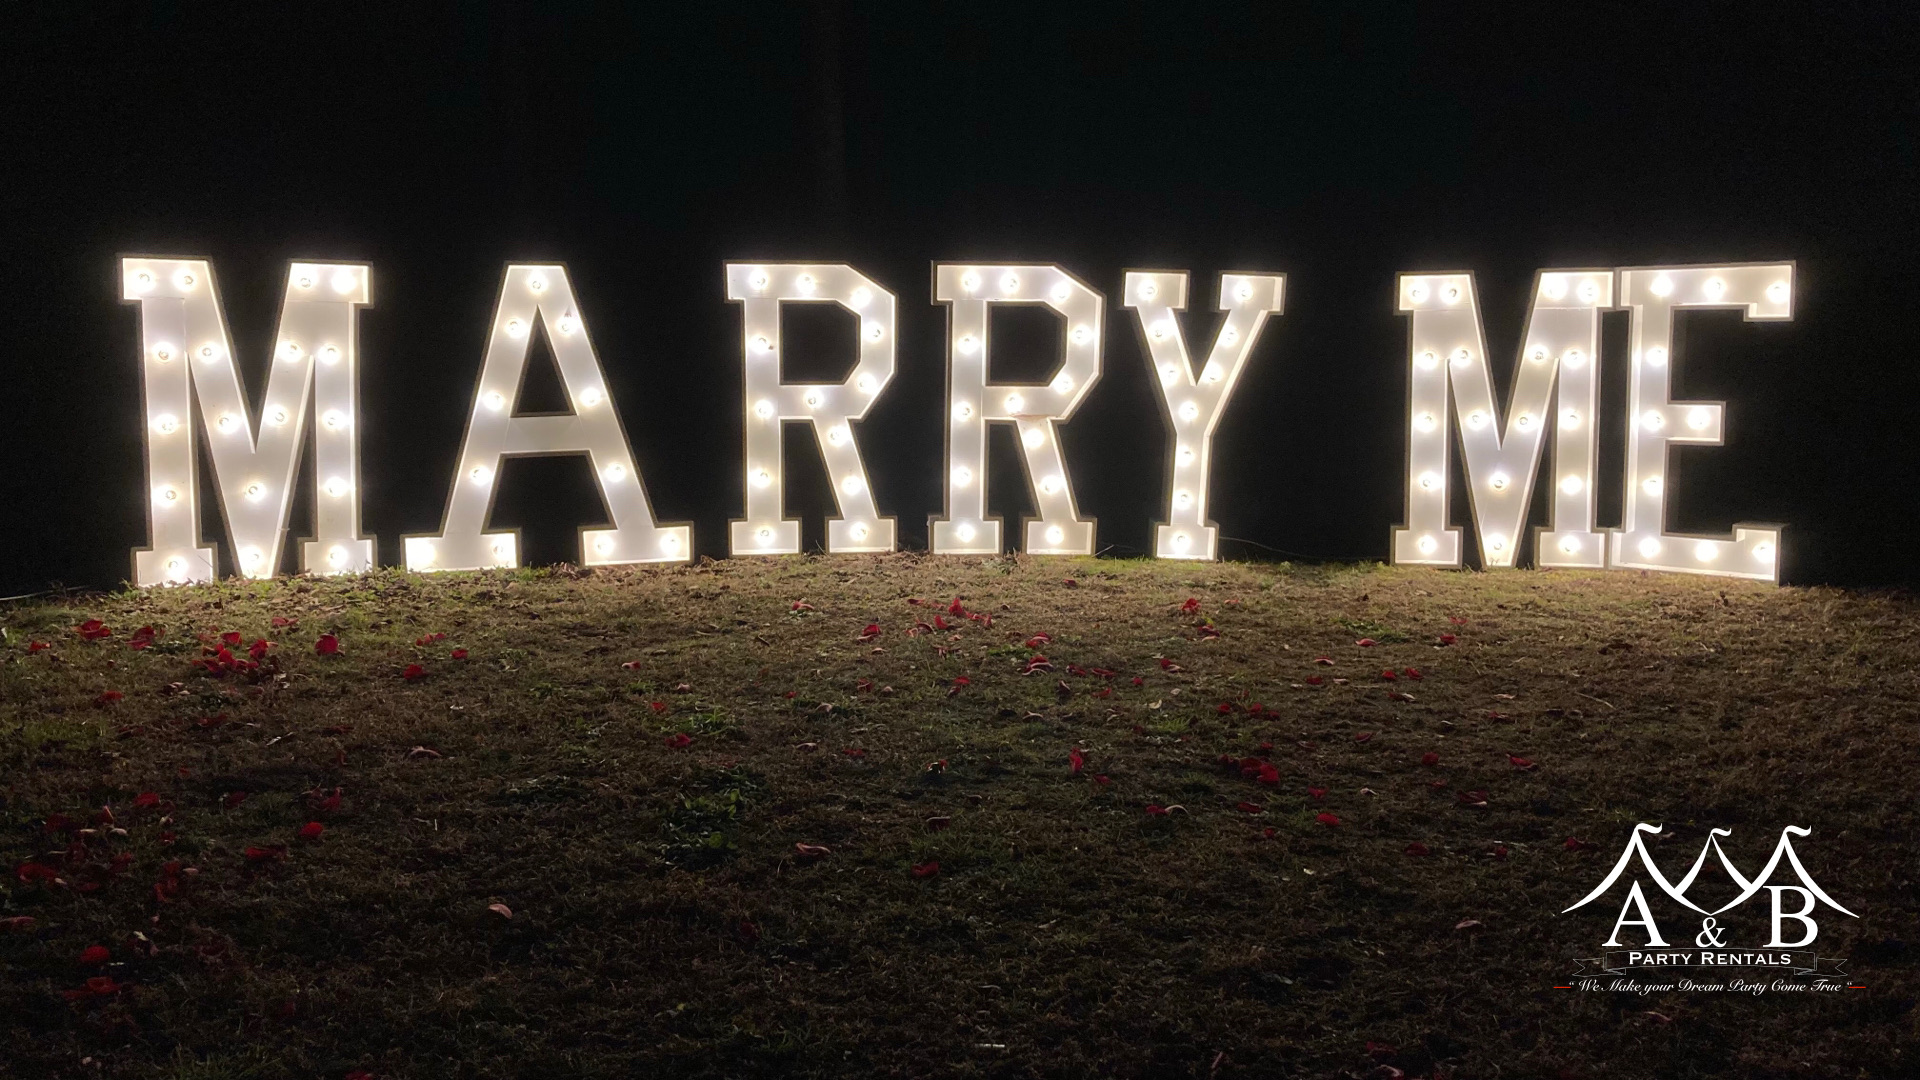 Large marquee letters that spell out 'Marry Me.' The image features illuminated marquee letters spelling 'Marry Me,' adding a romantic touch to events, available through A&B Party Rentals in Salisbury, MD.